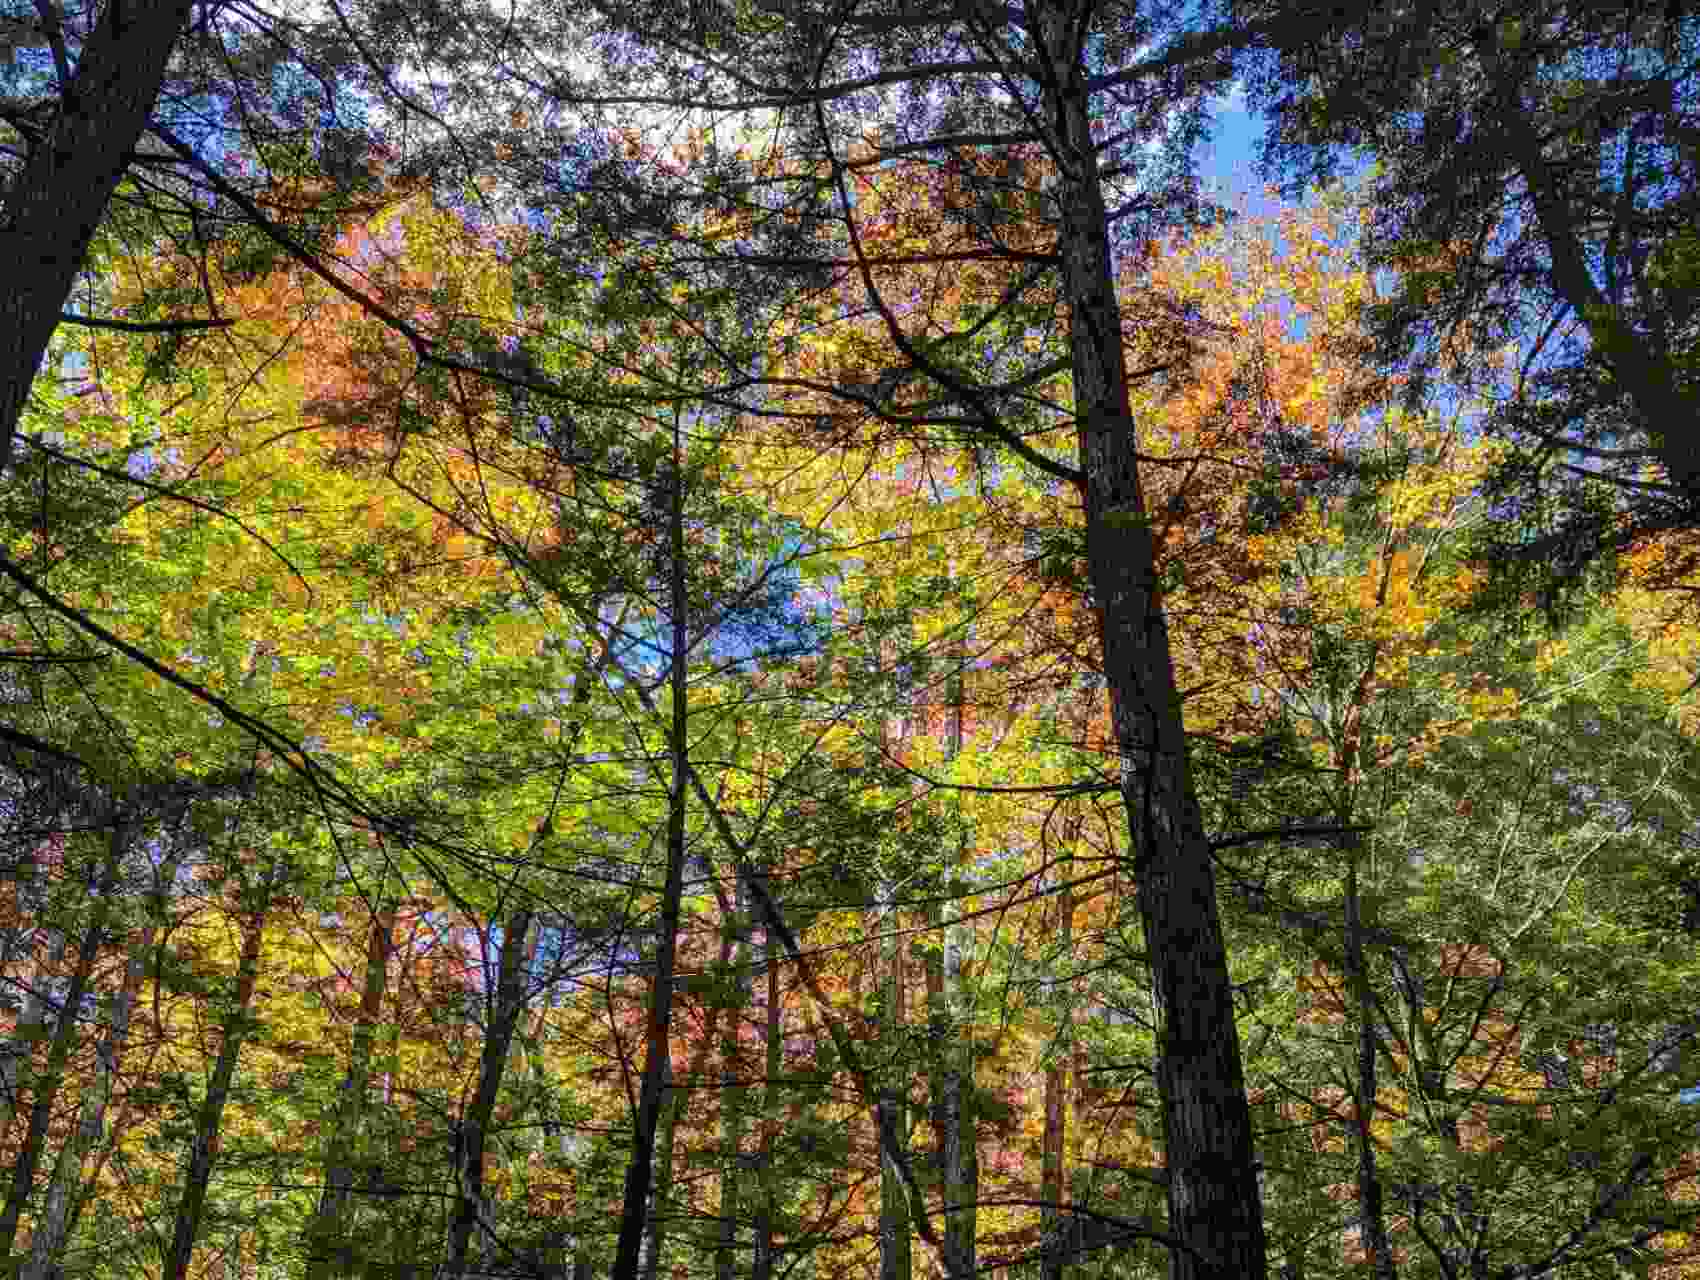 Looking up through a forest canopy of fall foliage